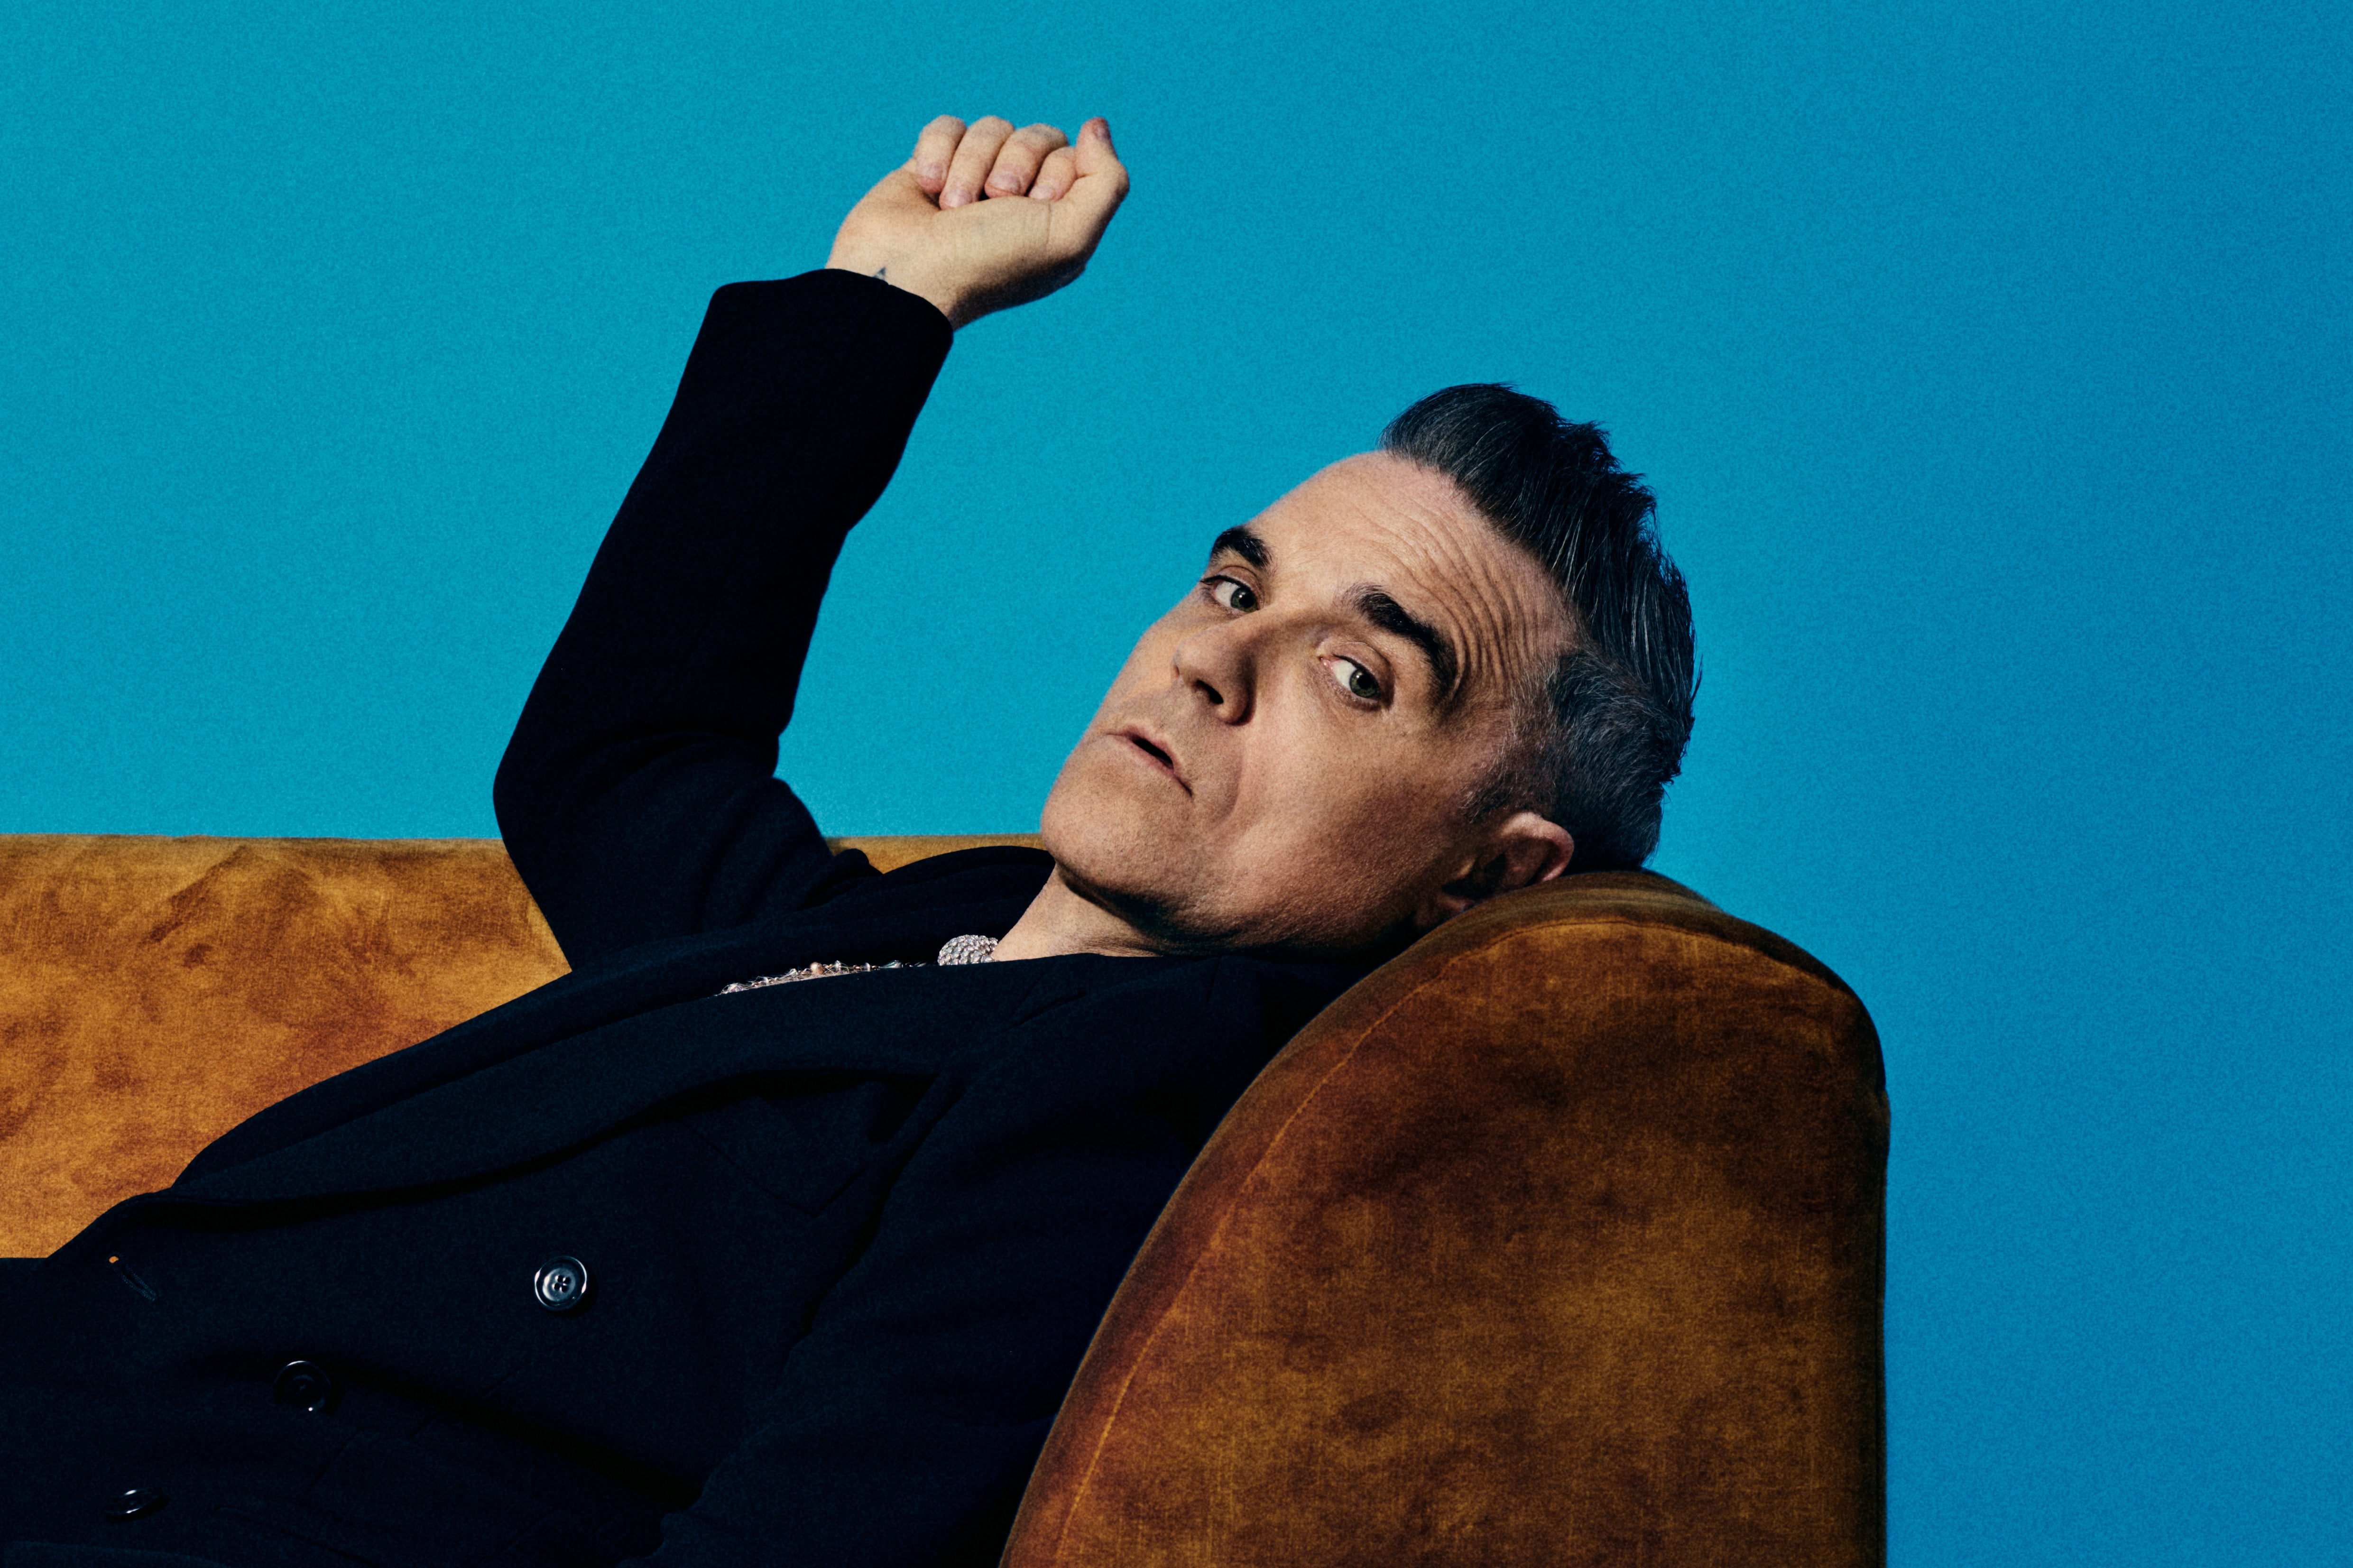 Analyse That: Robbie Williams poses on a couch in a promotional photo for his new Netflix docuseries